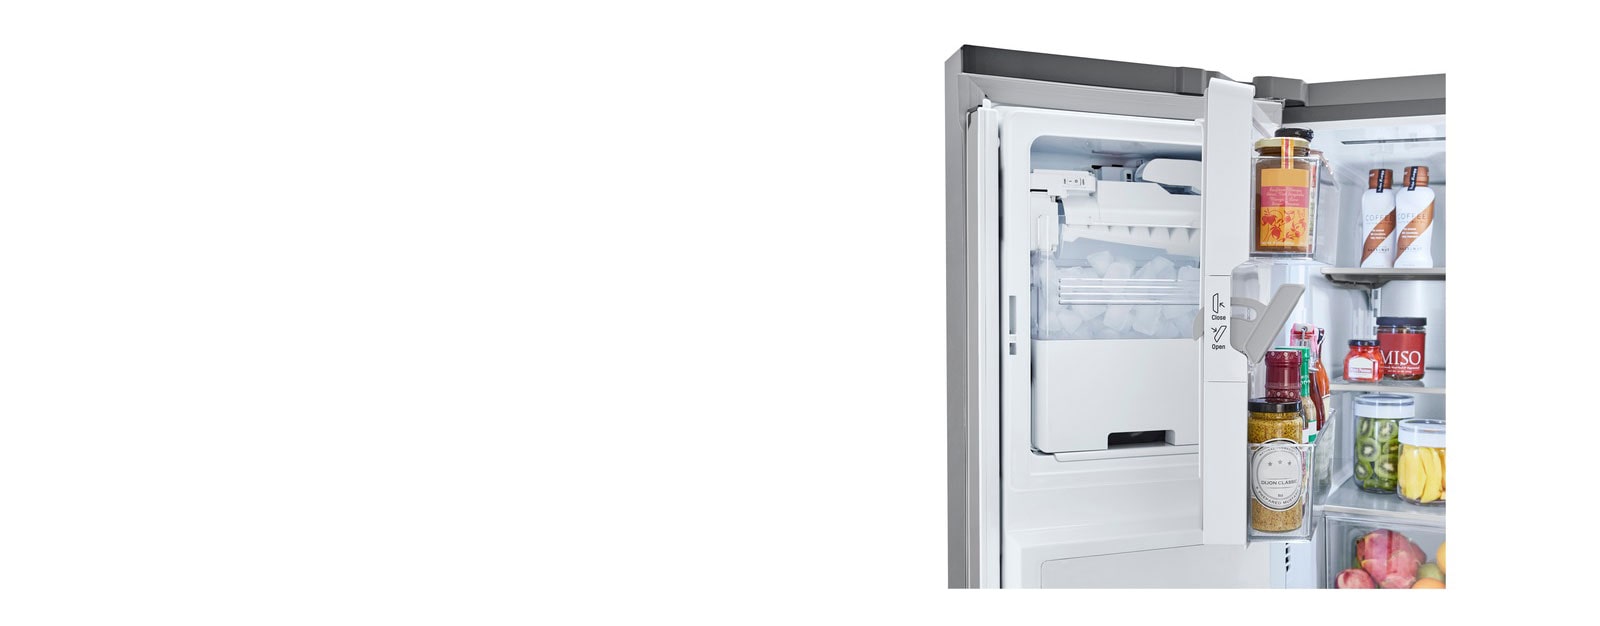 LRMVC2306SLG Appliances 23 cu. ft. Smart wi-fi Enabled InstaView®  Door-in-Door® Counter-Depth Refrigerator with Craft Ice™ Maker STAINLESS  STEEL - Westco Home Furnishings